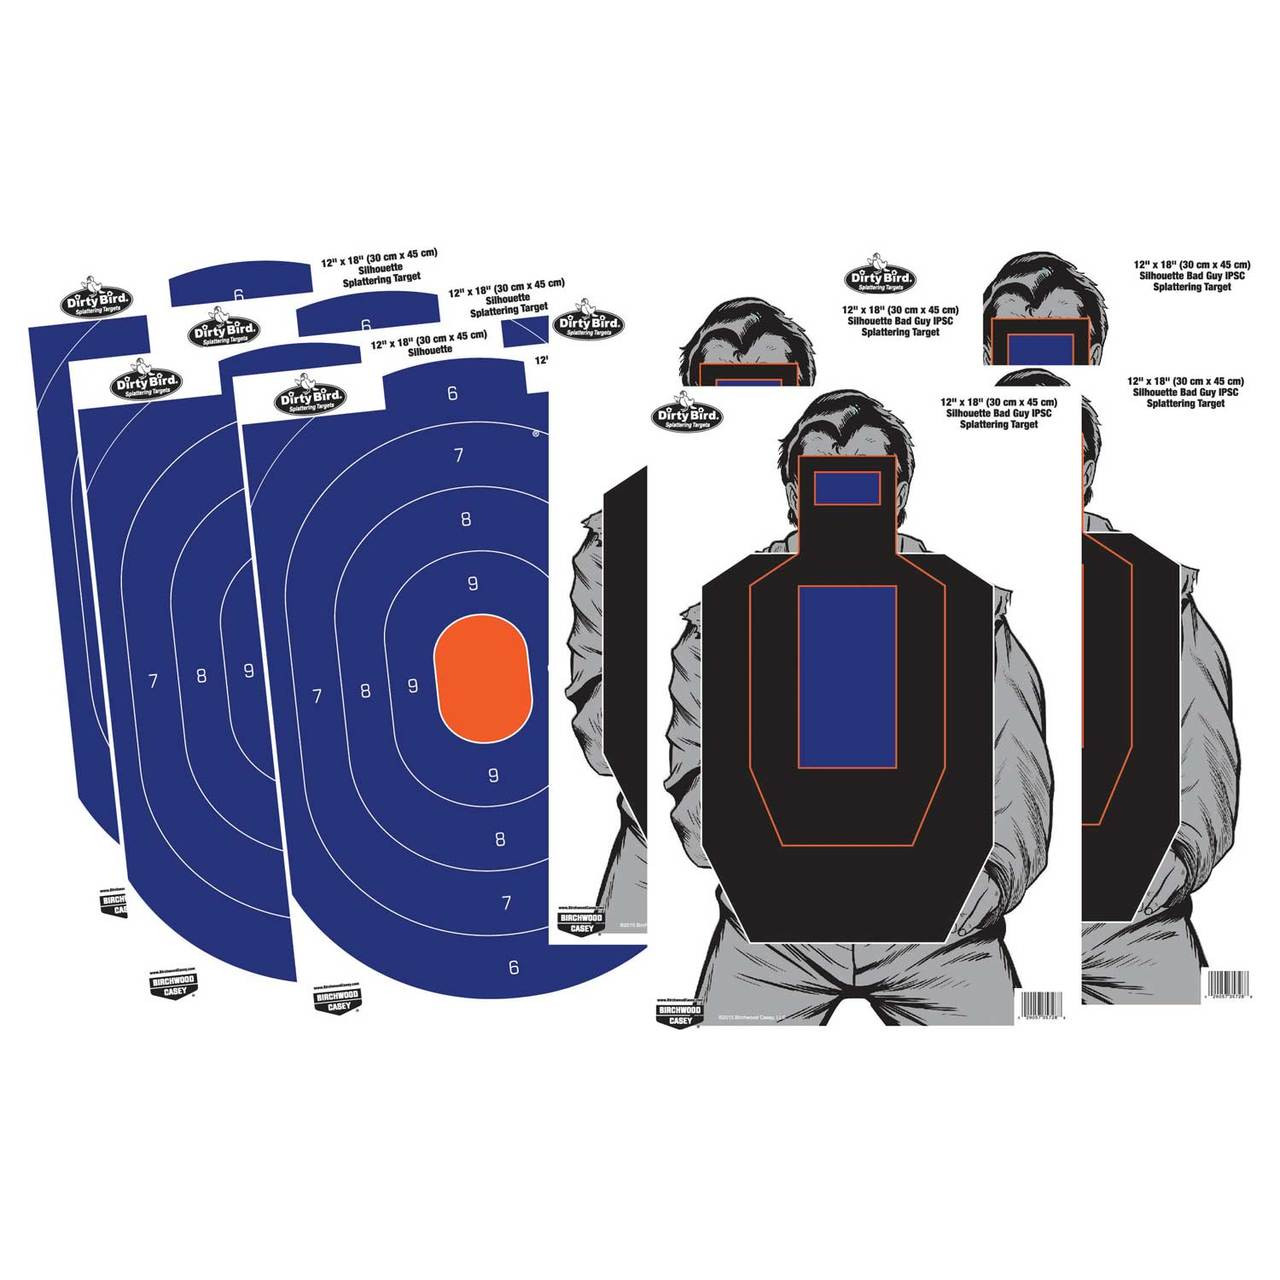 Birchwood Casey Dirty Bird 12 x 18 Target Combo 8-Pack - Newest Products